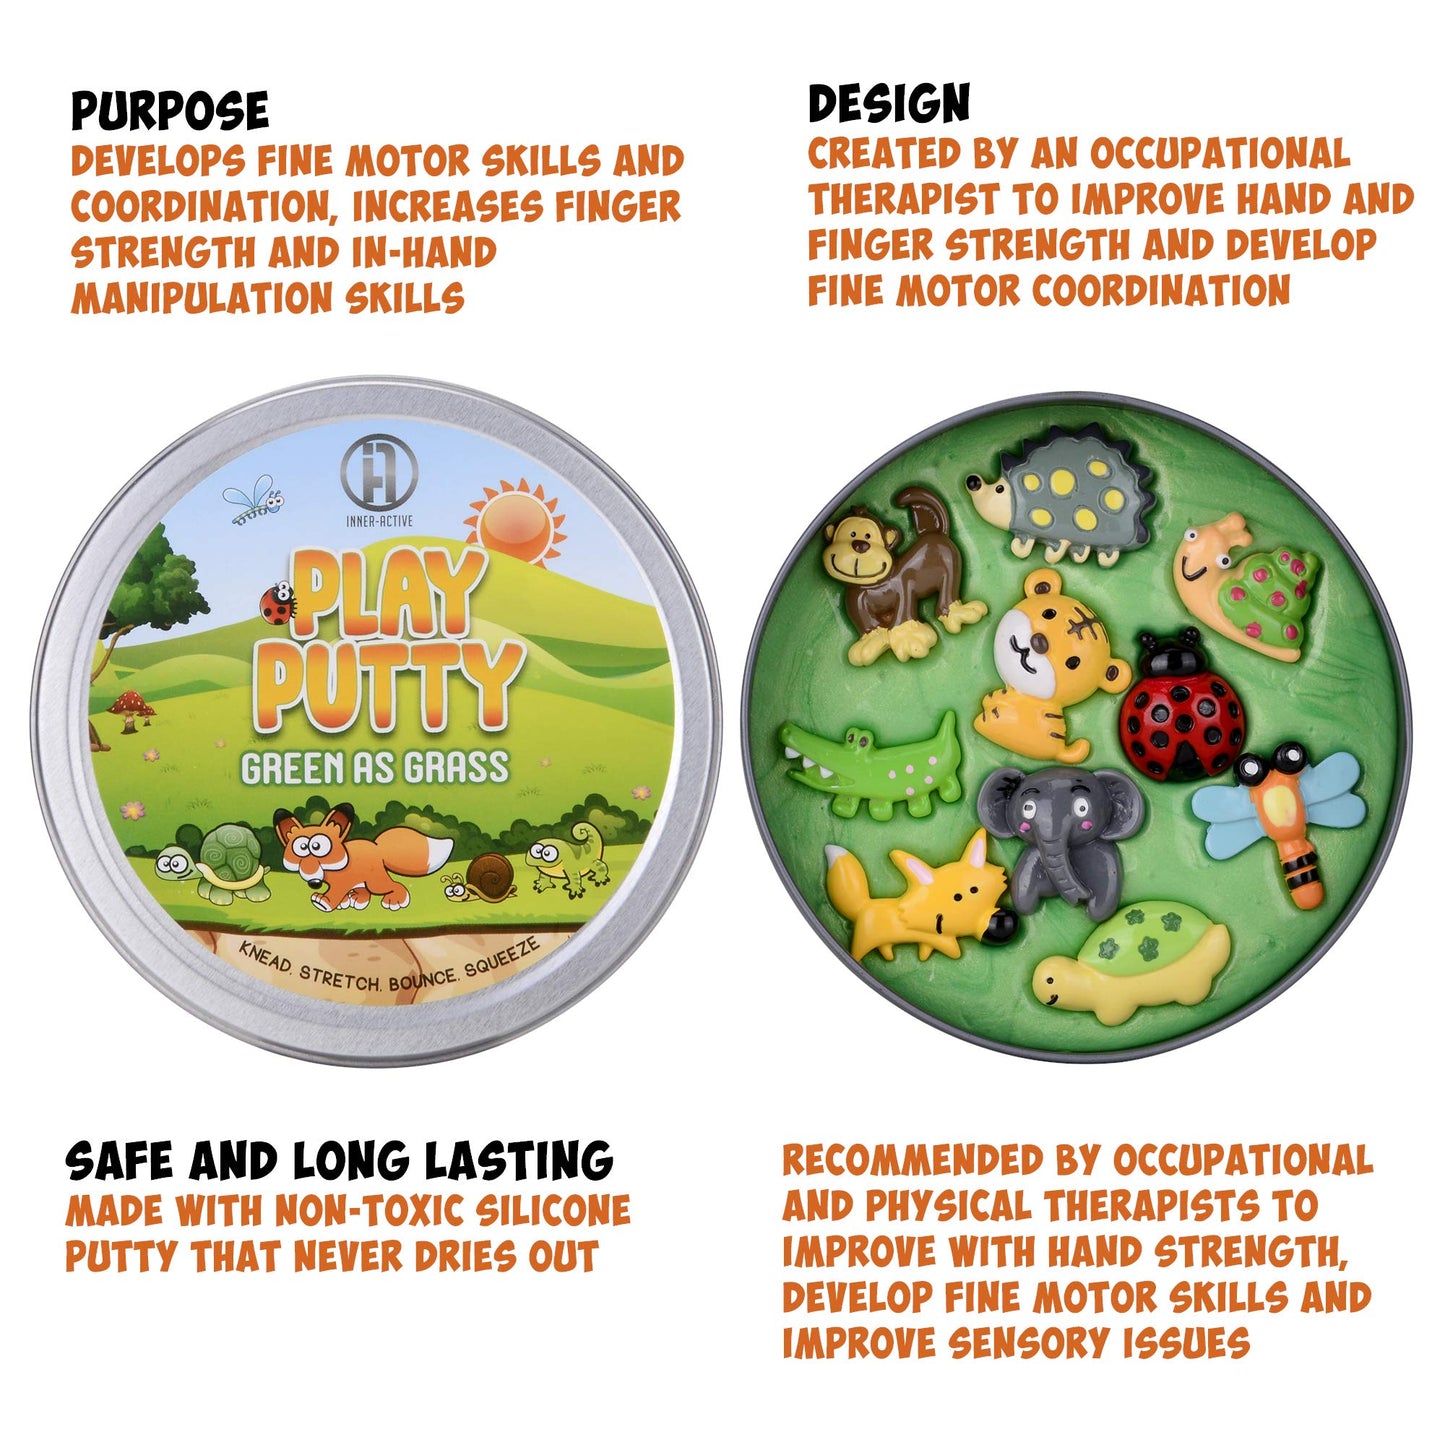 Inner-Active Play Putty Therapy Putty for Kids with Charms Green as Grass Theraputty Medium Resistance, Increase fine Motor Skills and Finger Strength, Occupational and Physical Therapist Recommended